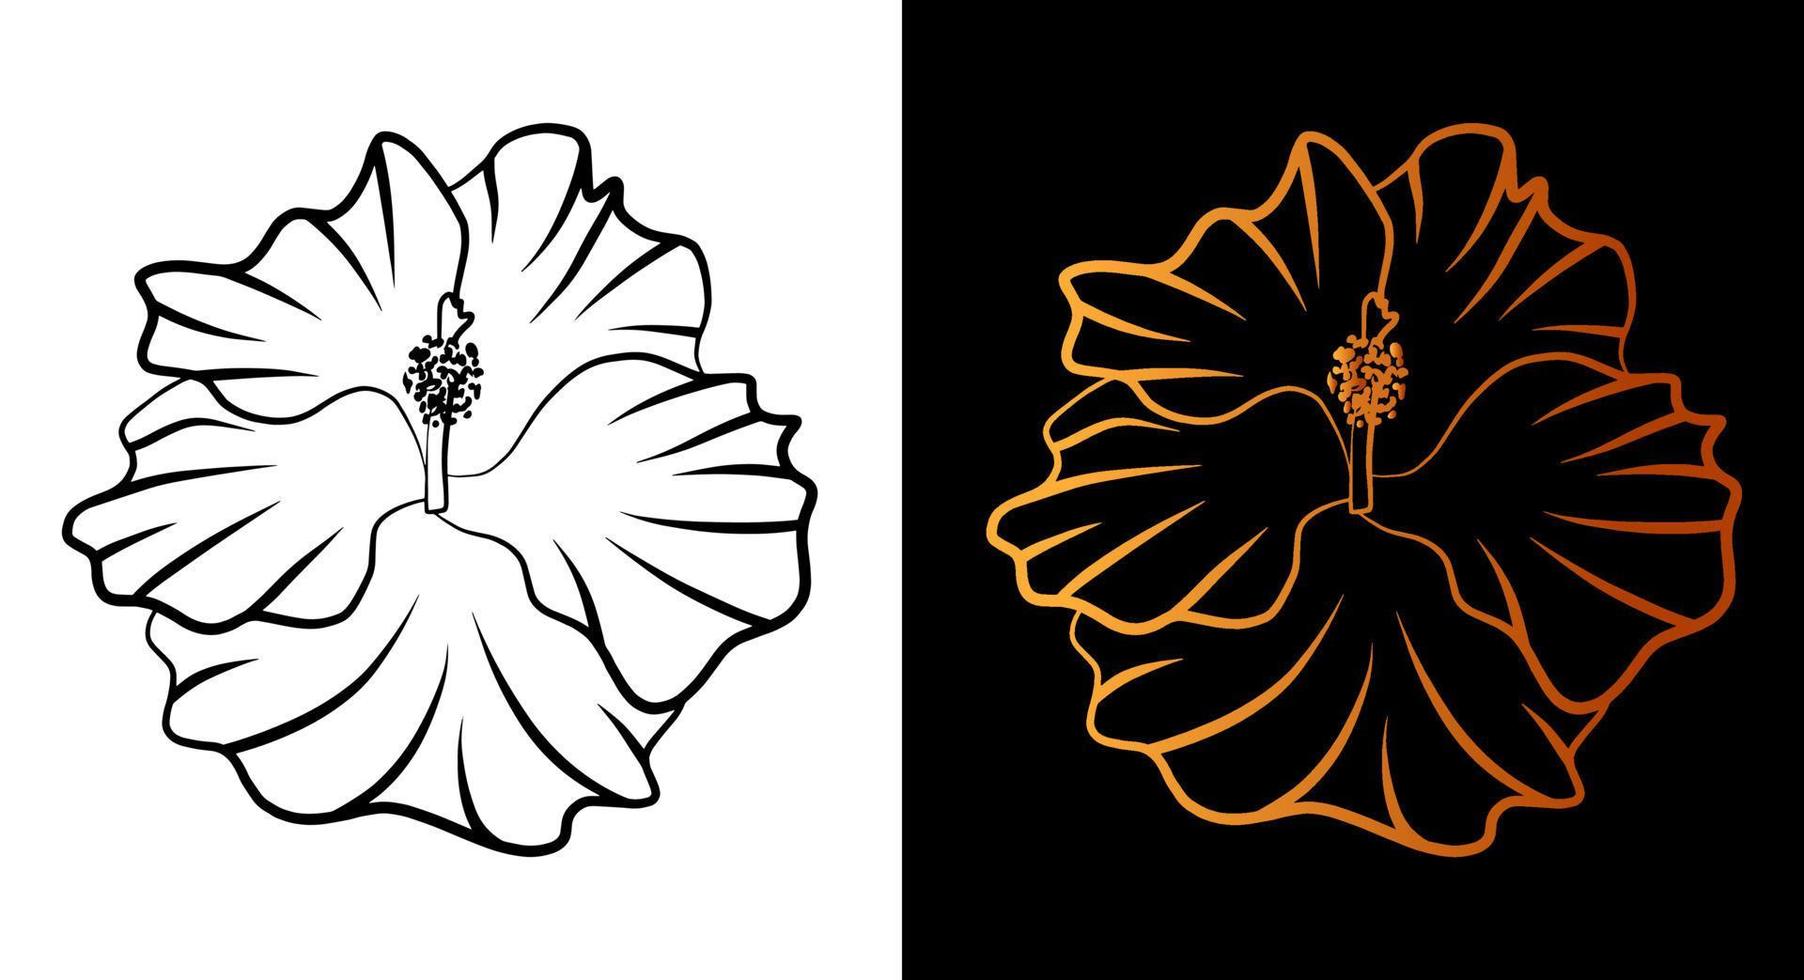 Flower outline icon, simple doodle sketch line art style, black and gold floral botany set. Beauty elegant logo design element. Graphic isolated symbol drawing. Flat shape, wedding tattoo print card. vector